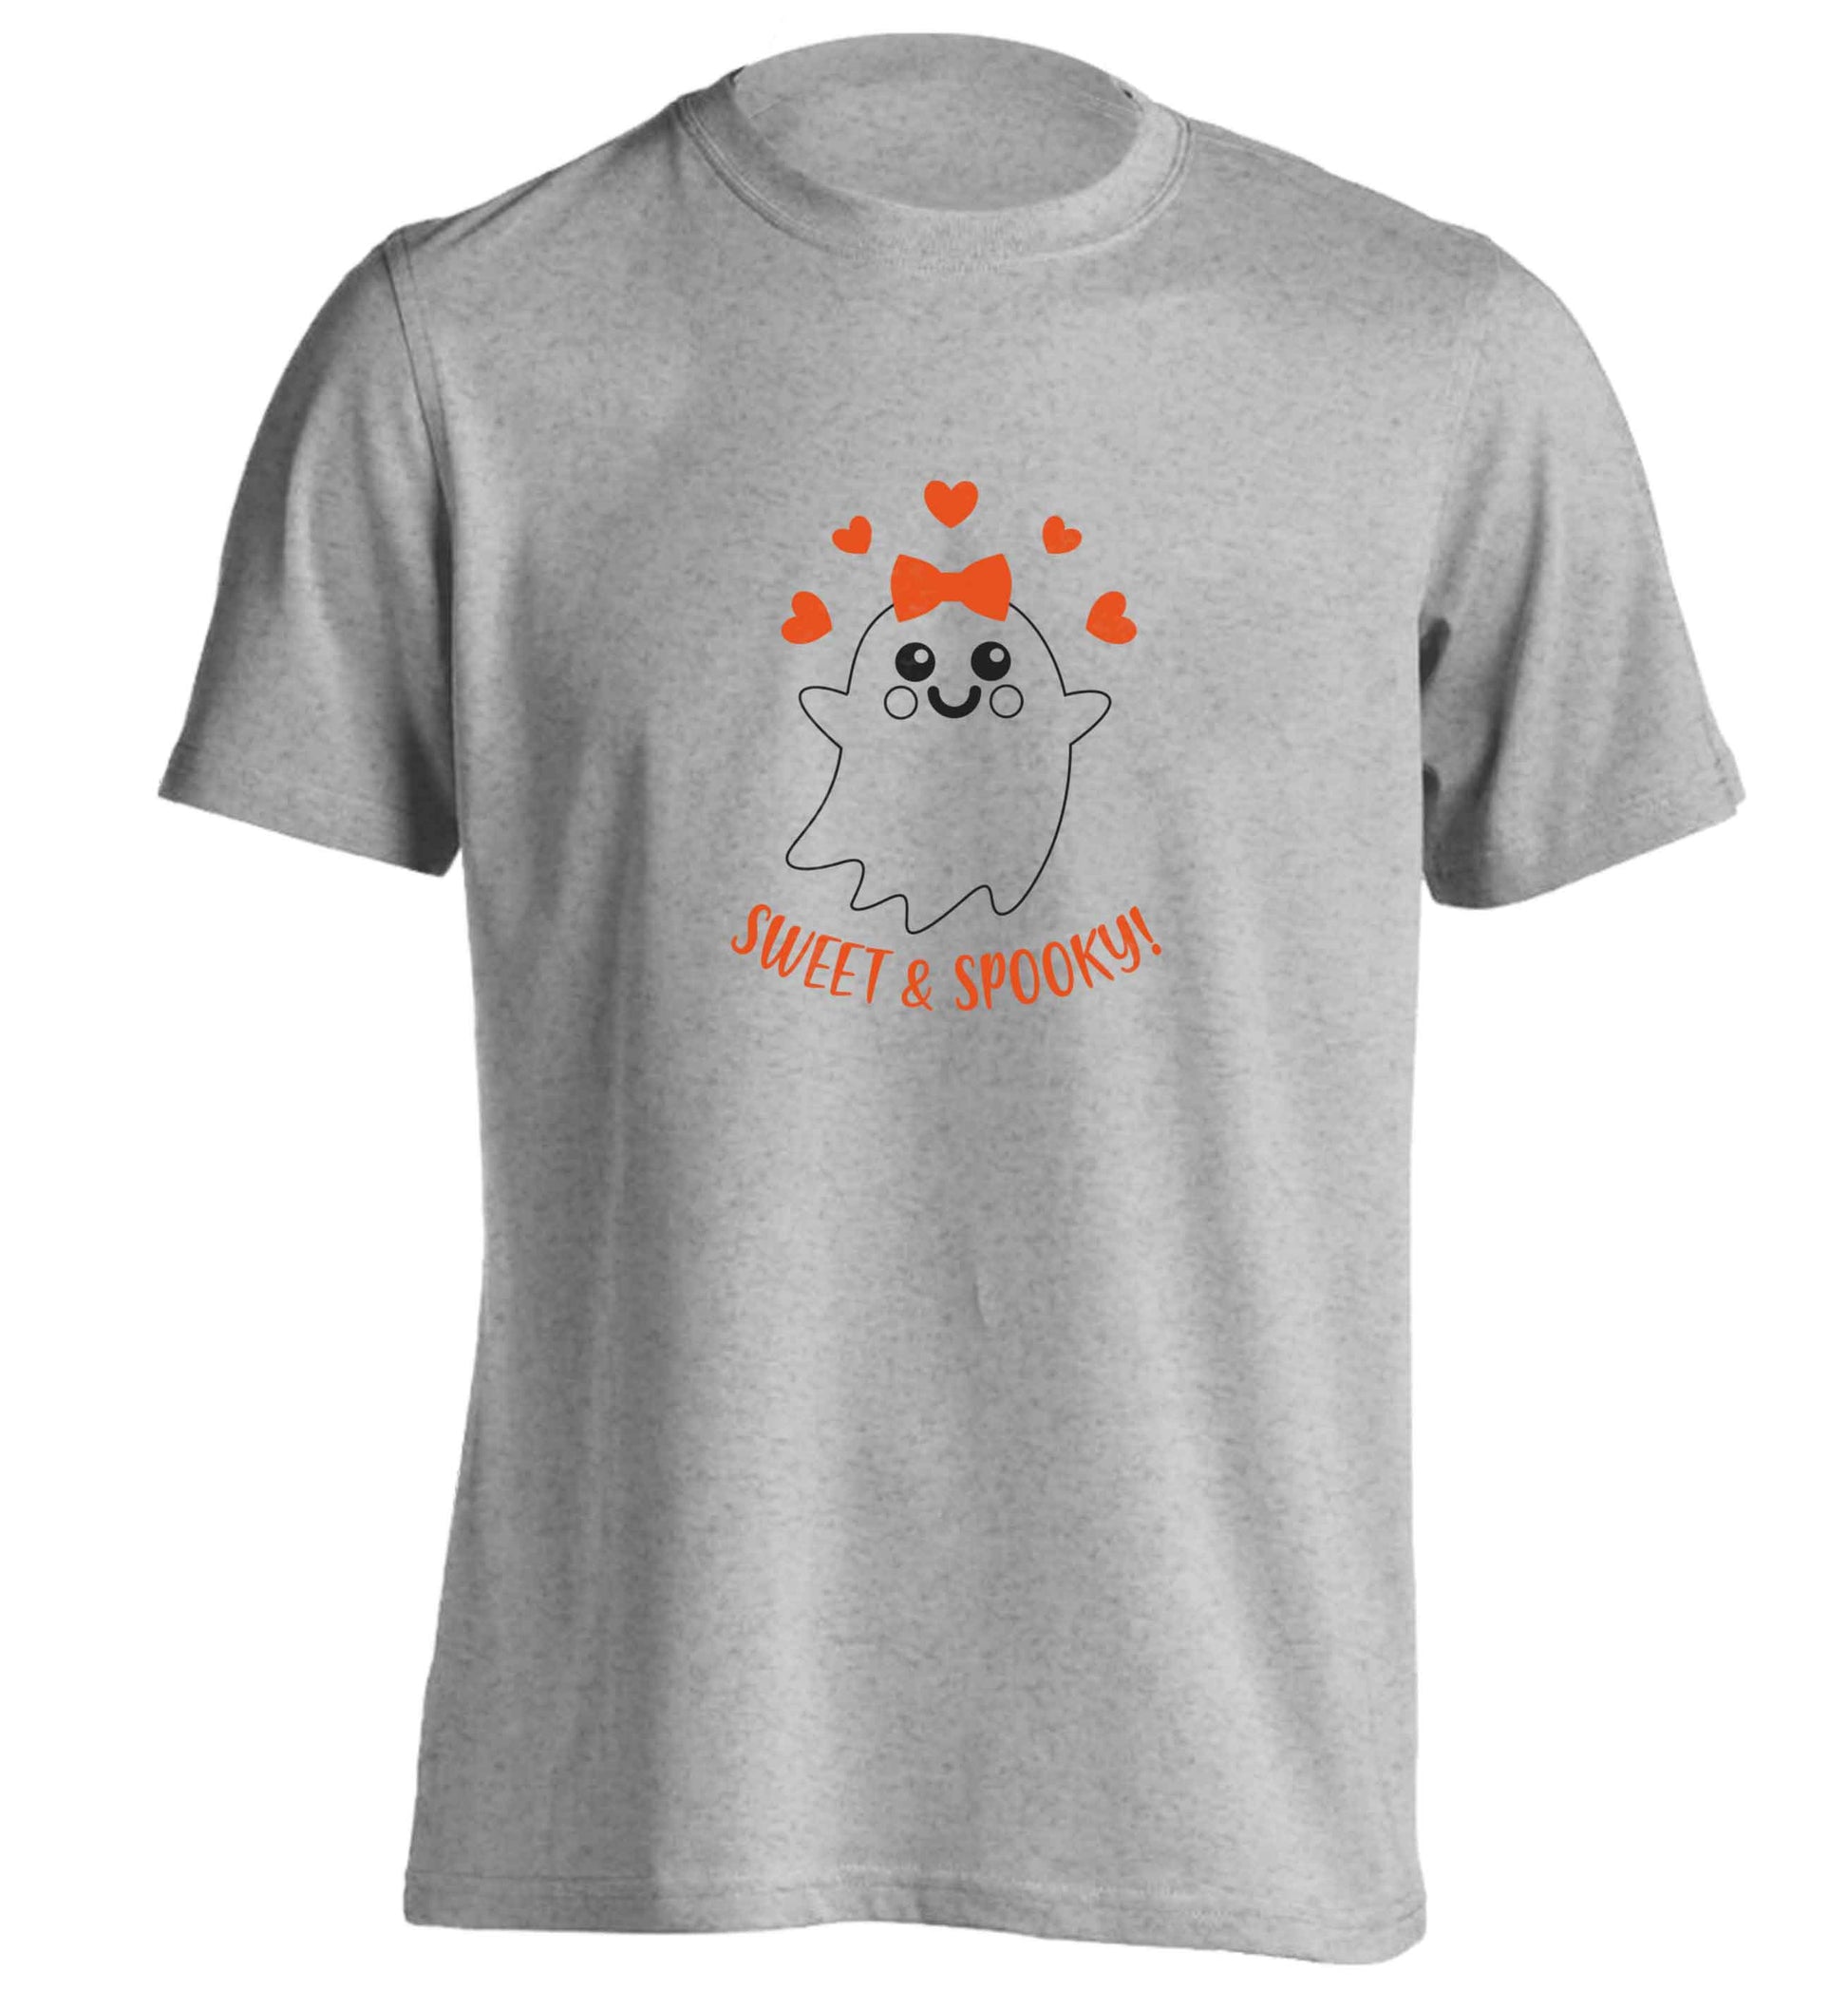 Sweet and spooky adults unisex grey Tshirt 2XL